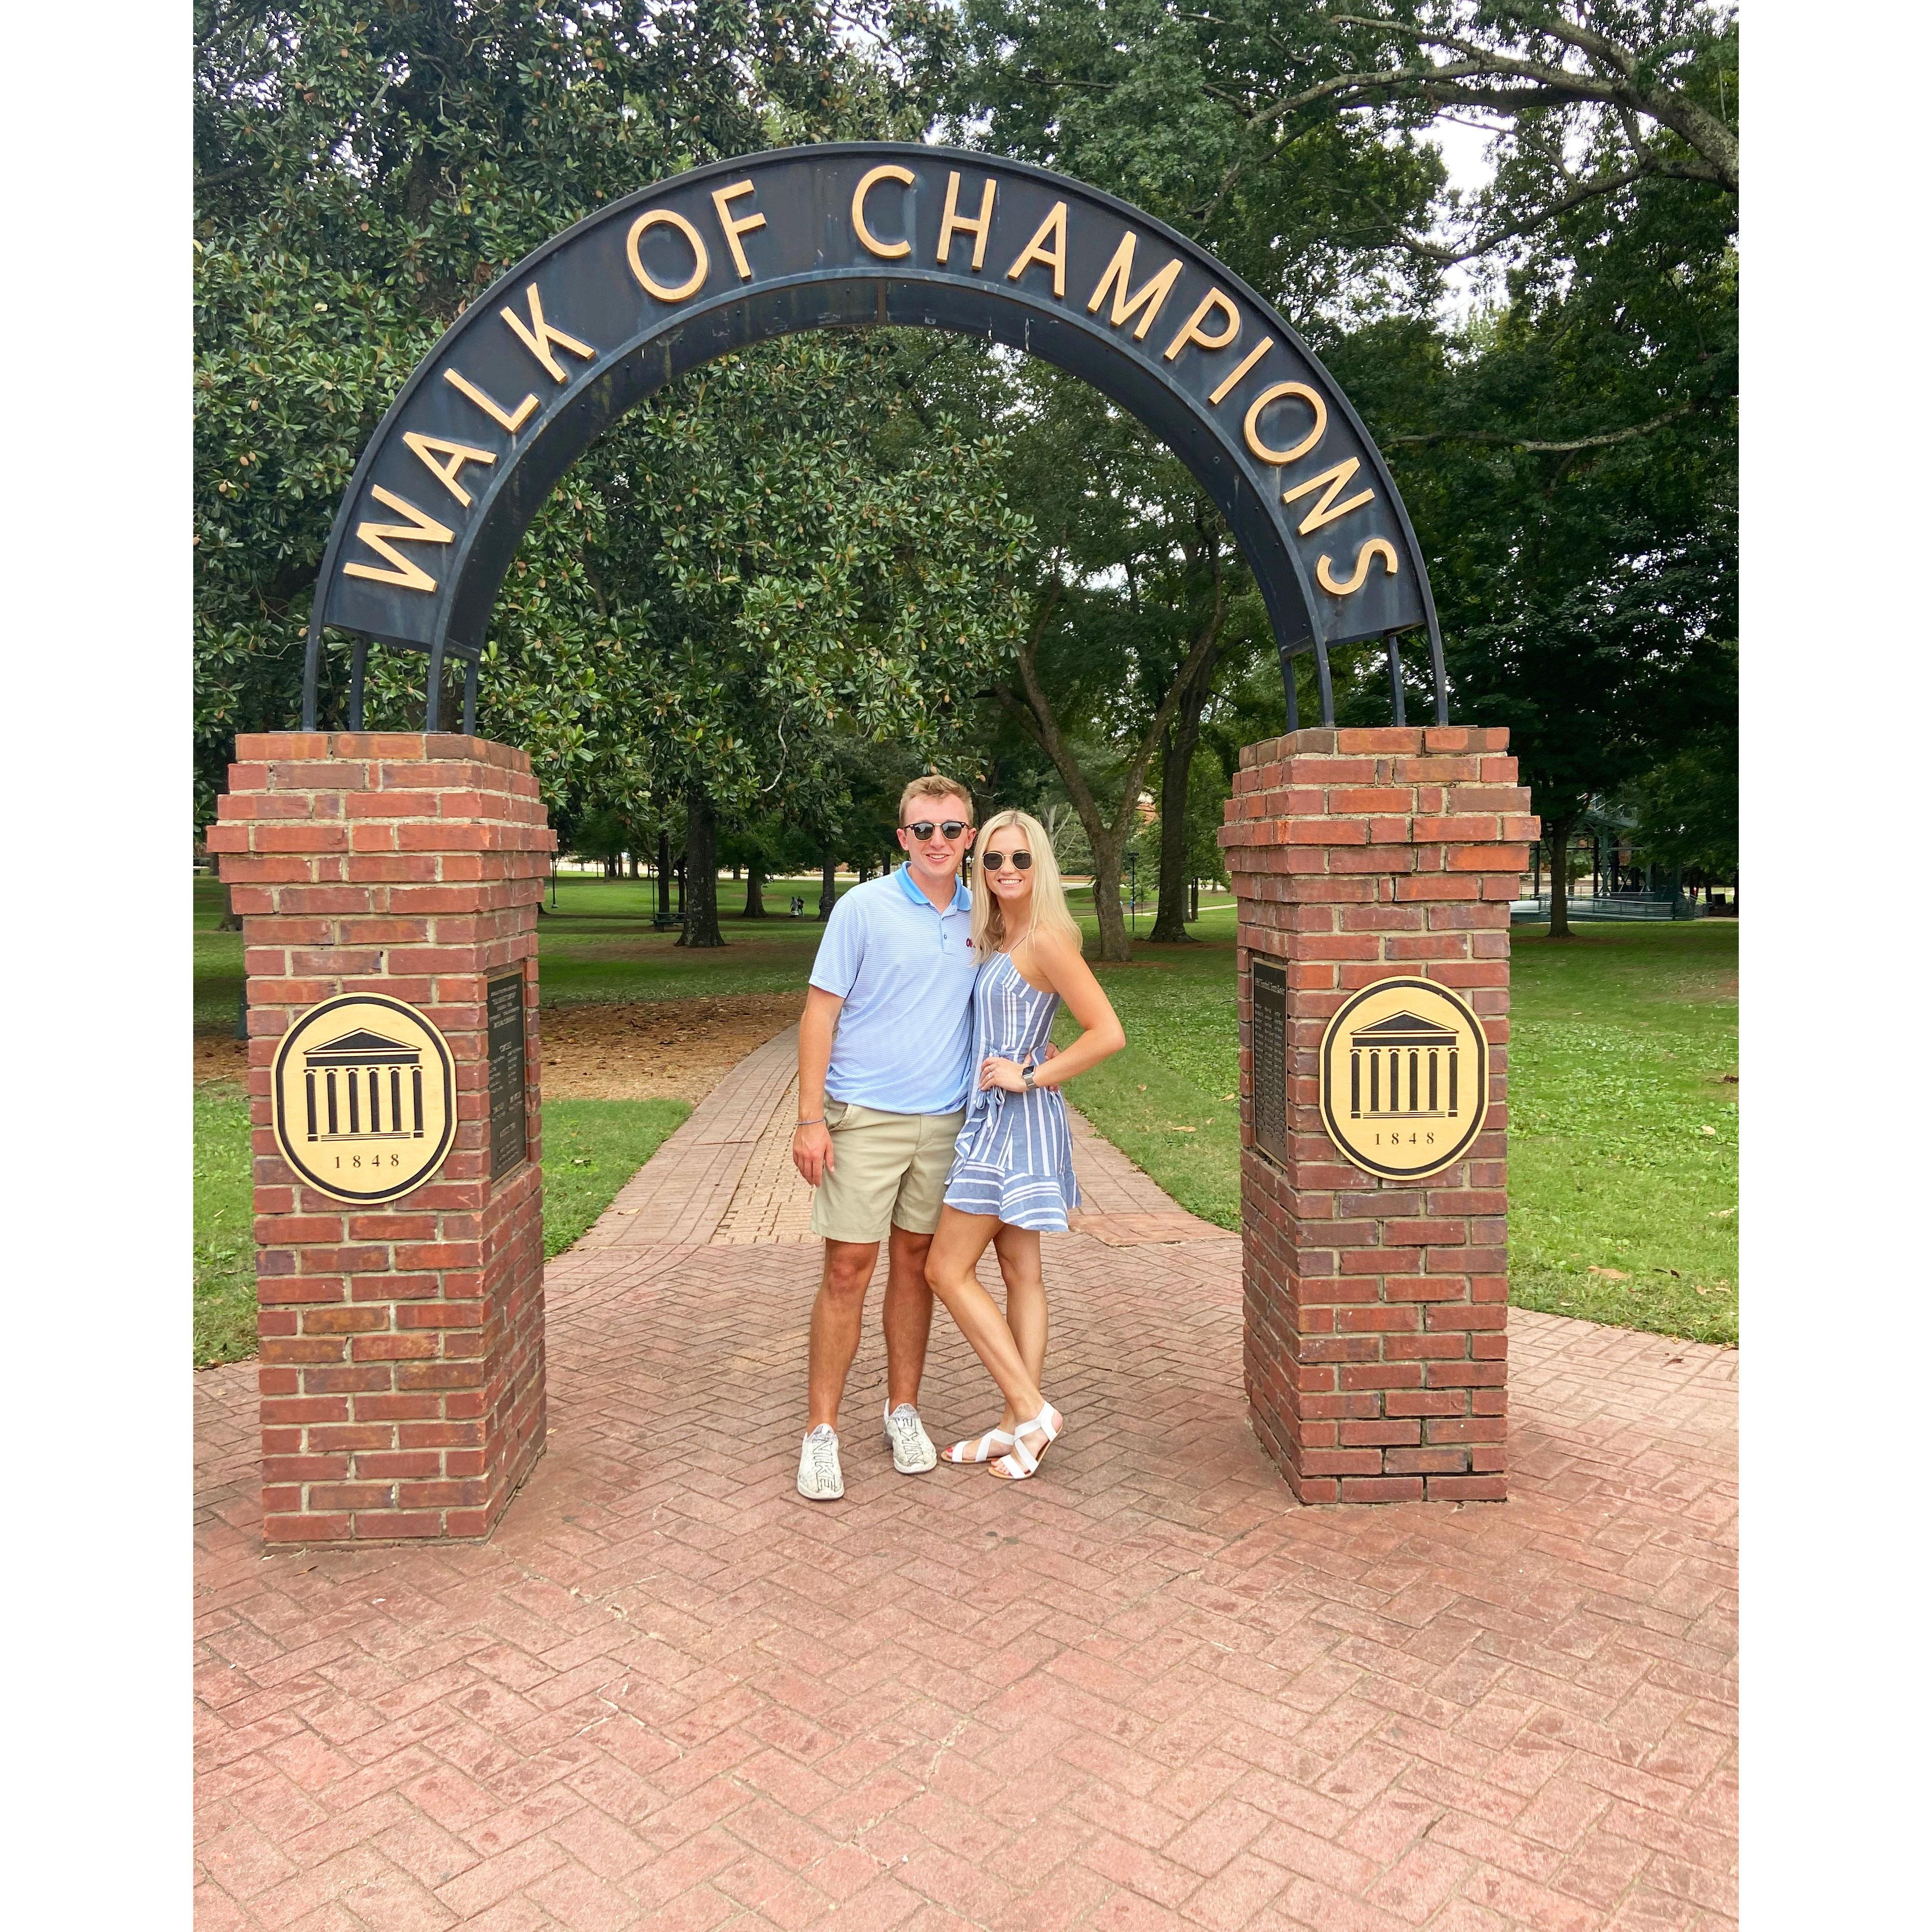 September, 2020: Trey took Annie to visit Oxford, MS for the first time! Went to the Ole Miss vs. Florida football game.